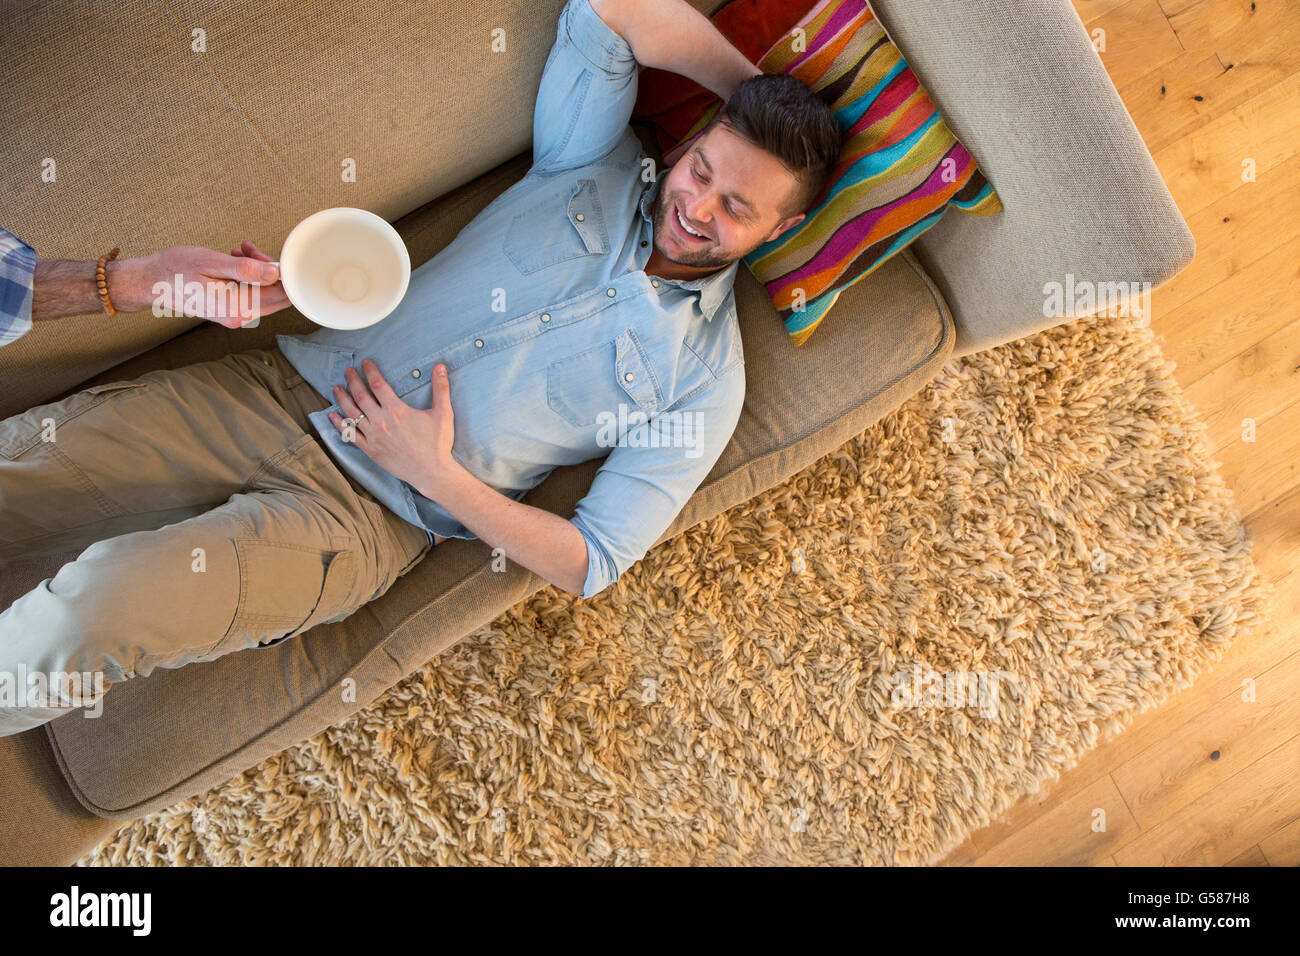 Man relaxing on the sofa. His partners arm is in the shot with an empty coffee cup in his hand as he takes it away. Stock Photo